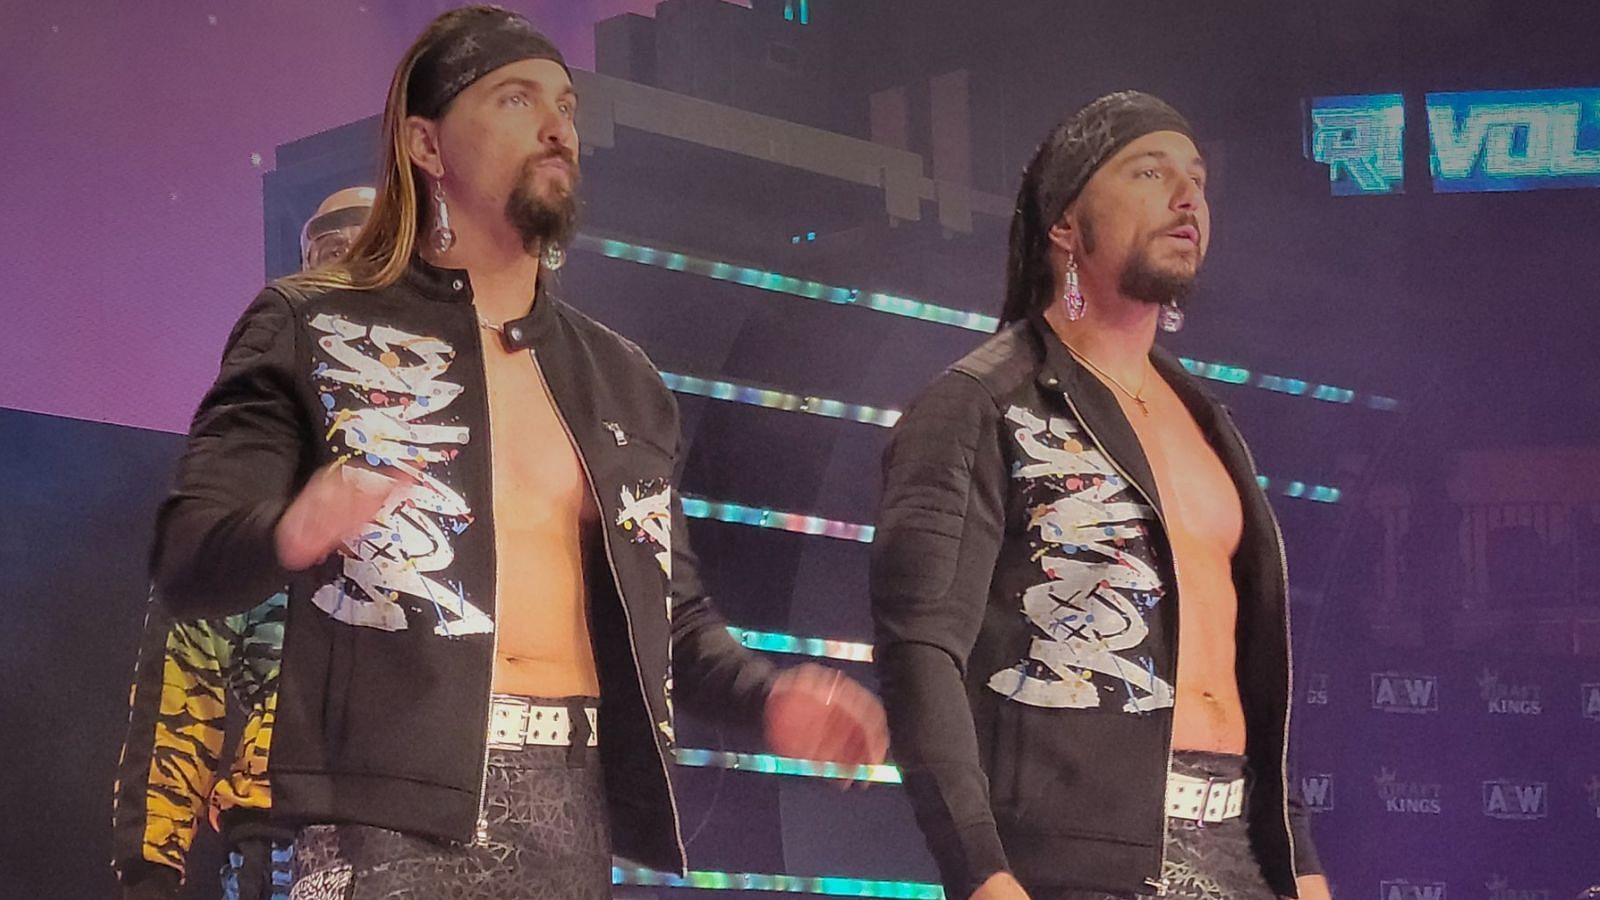 The Bucks are the longest reigning AEW Tag Team Champions.